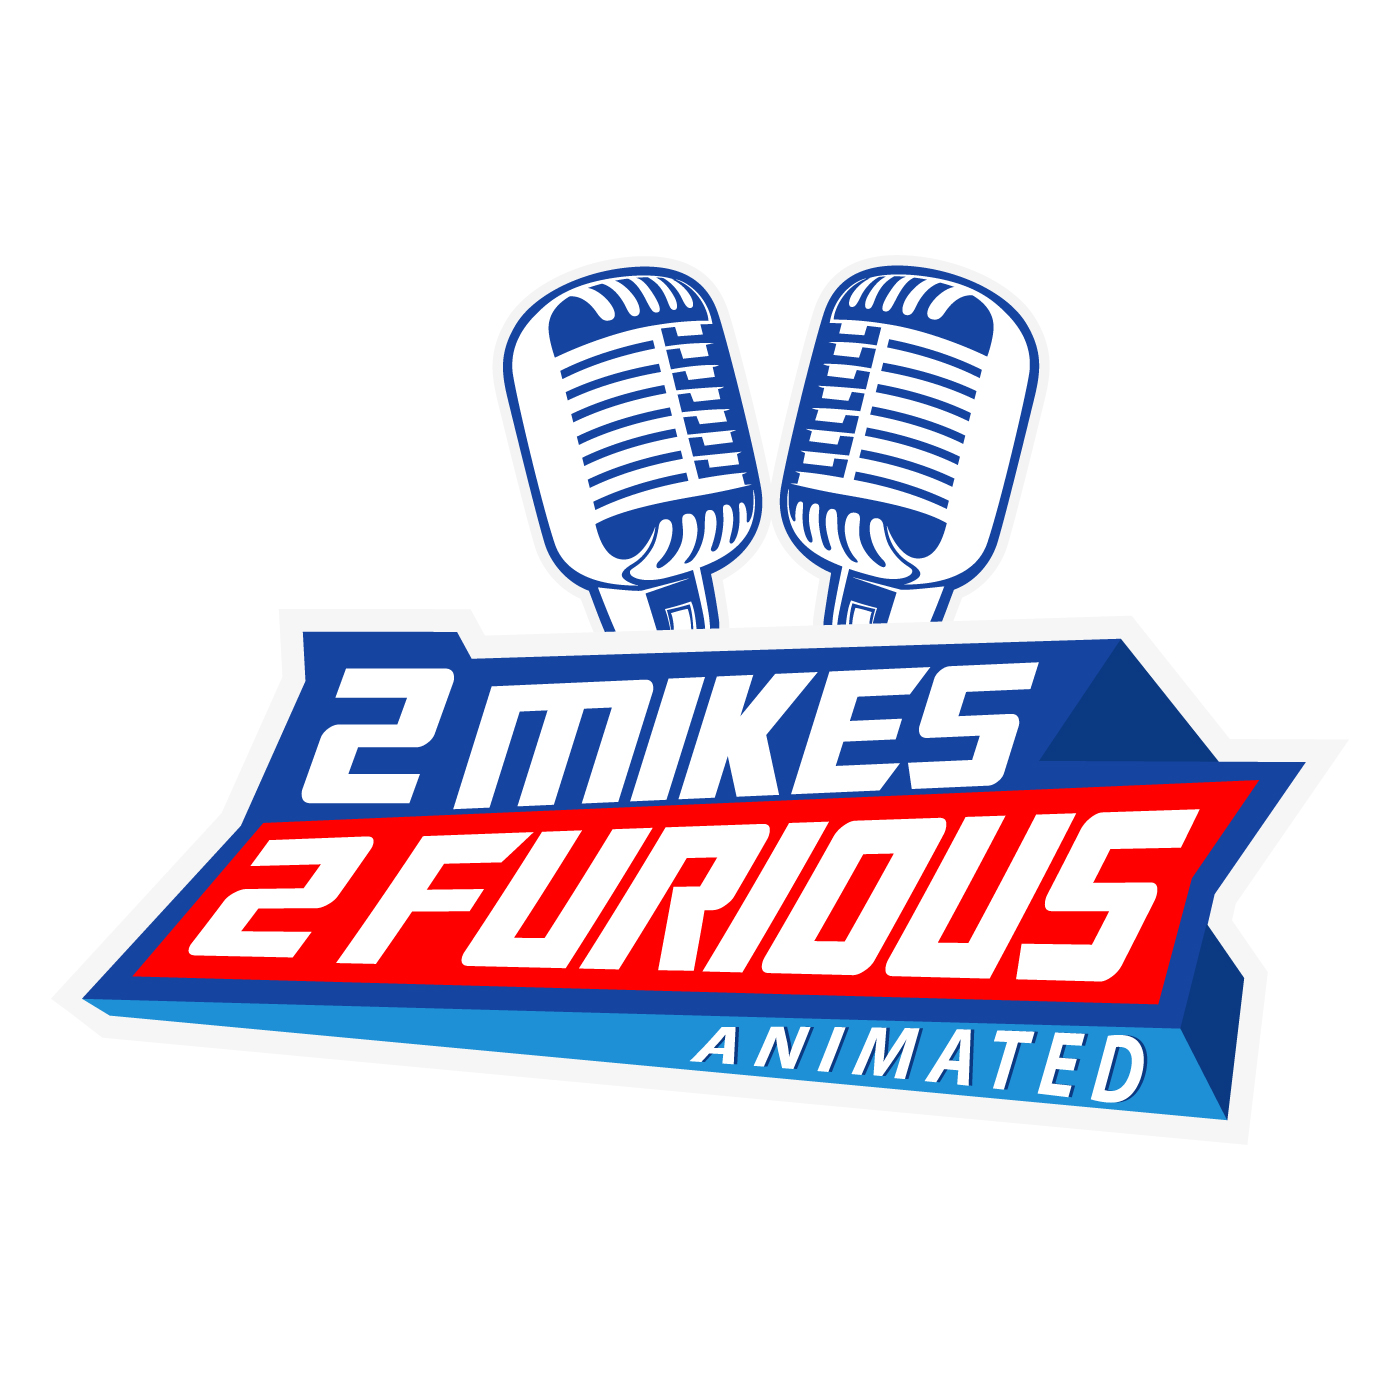 Artwork for 2 Mikes 2 Furious - Animated Transformers